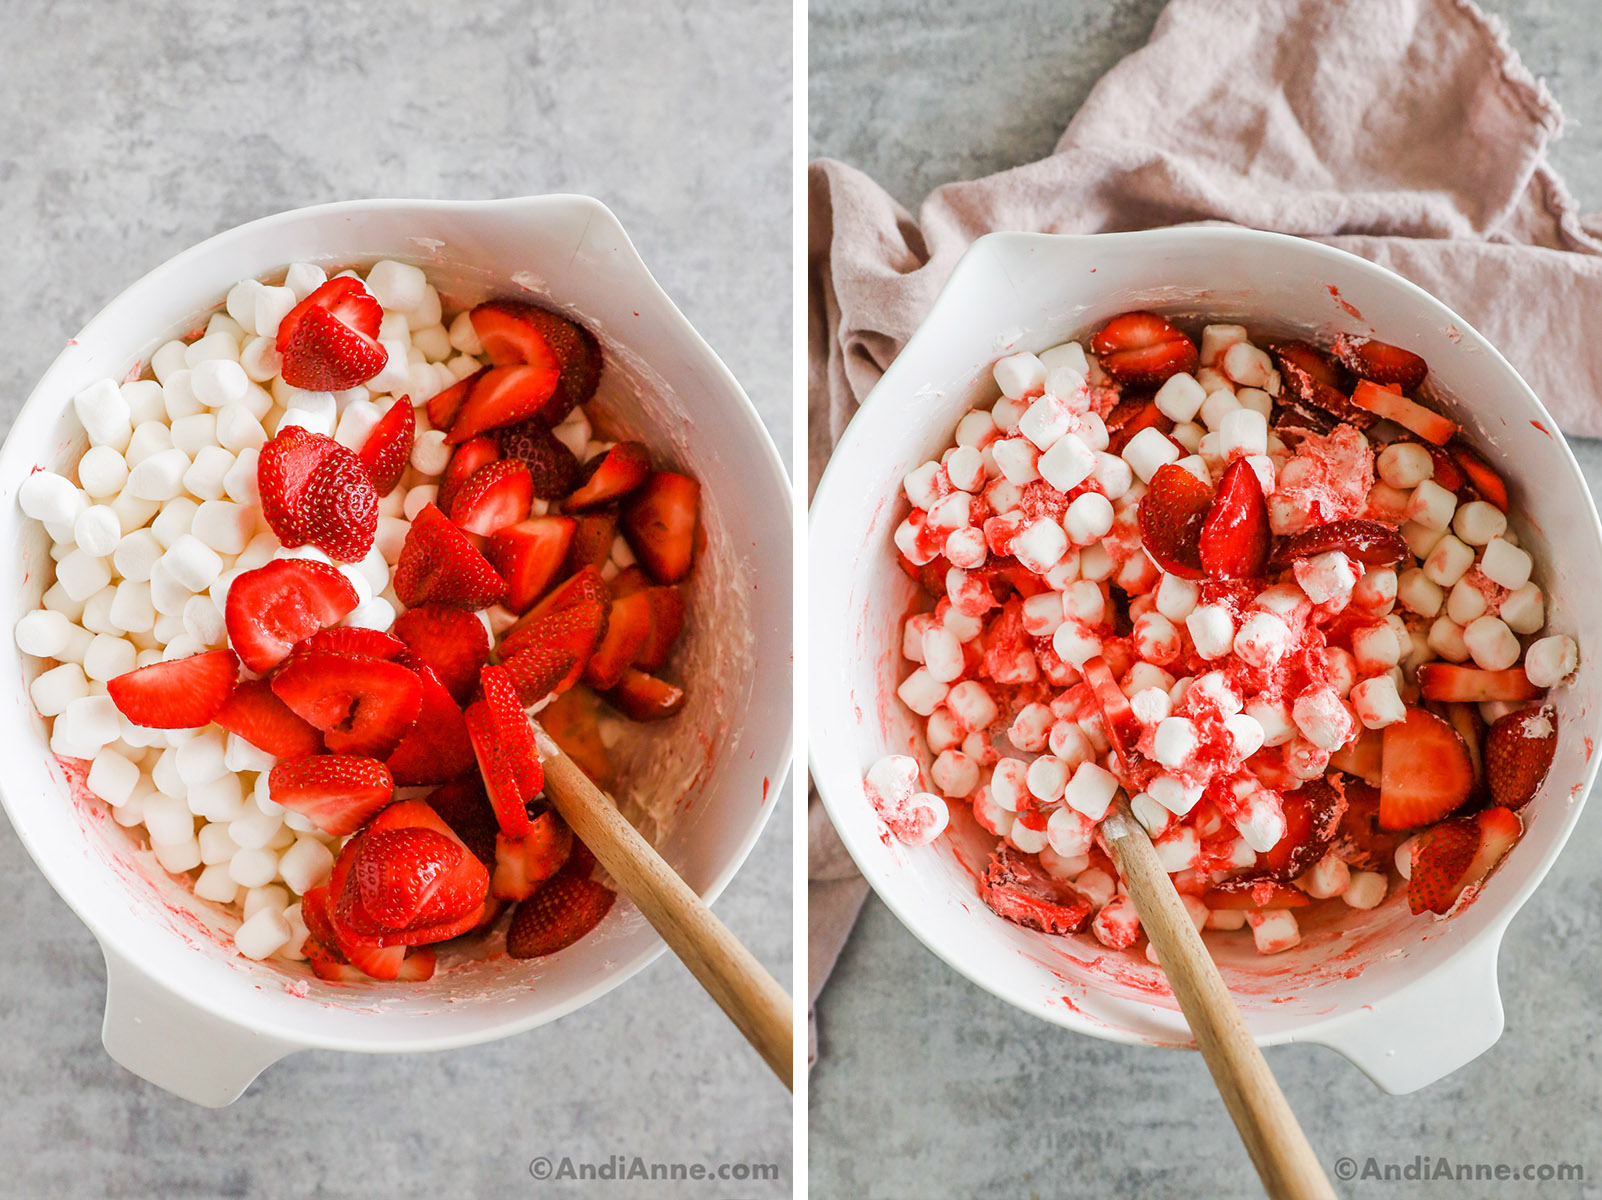 Mini marshmallows and sliced strawberries mixed into strawberry gelatin mixture.